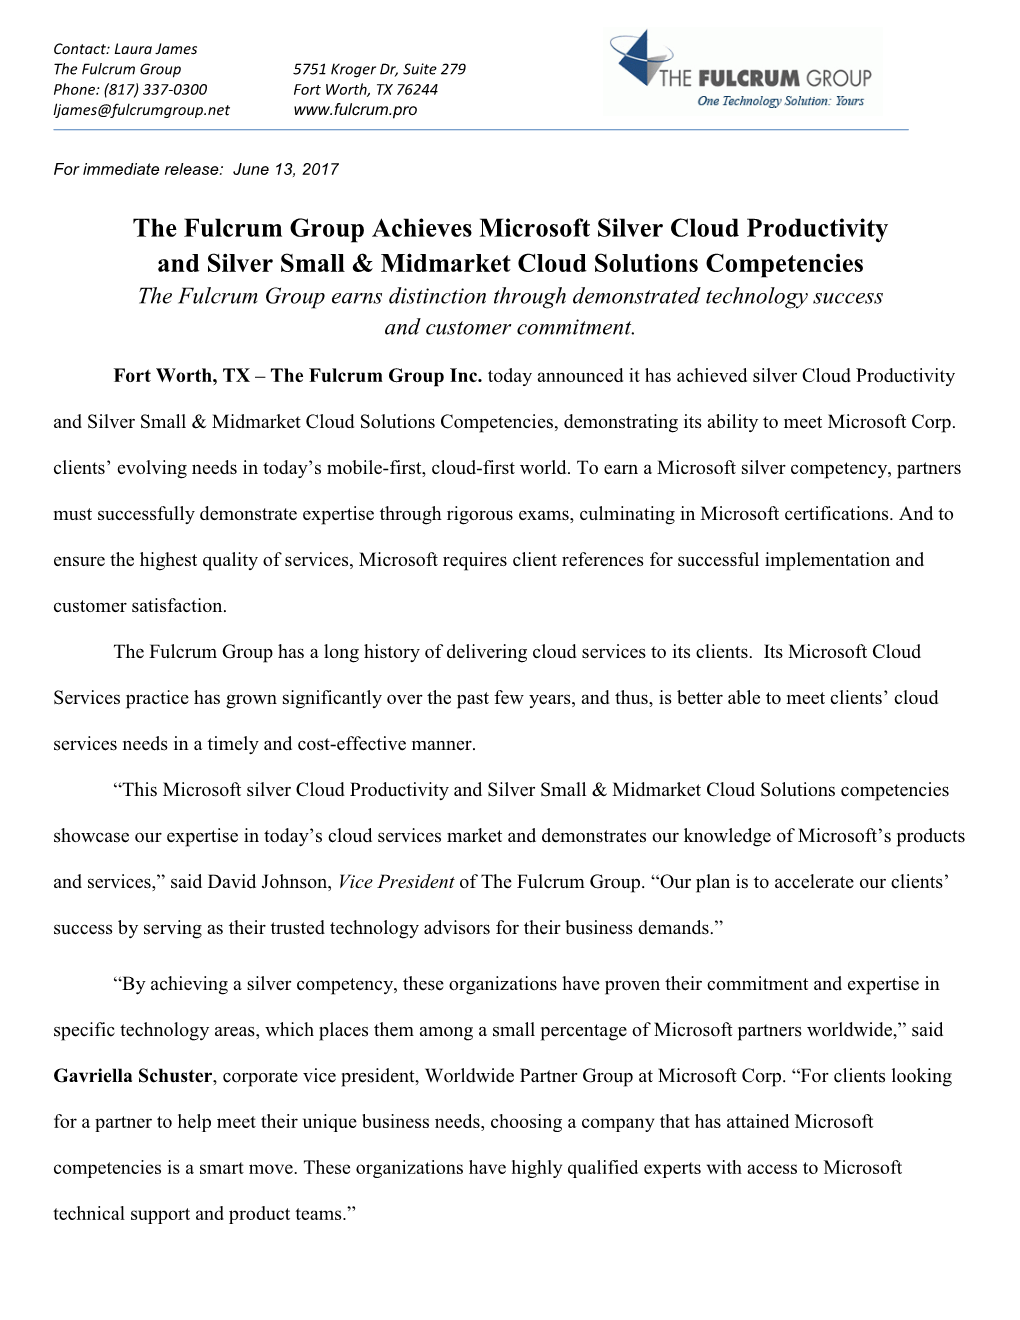 The Fulcrum Group Achieves Microsoft Silver Cloud Productivity